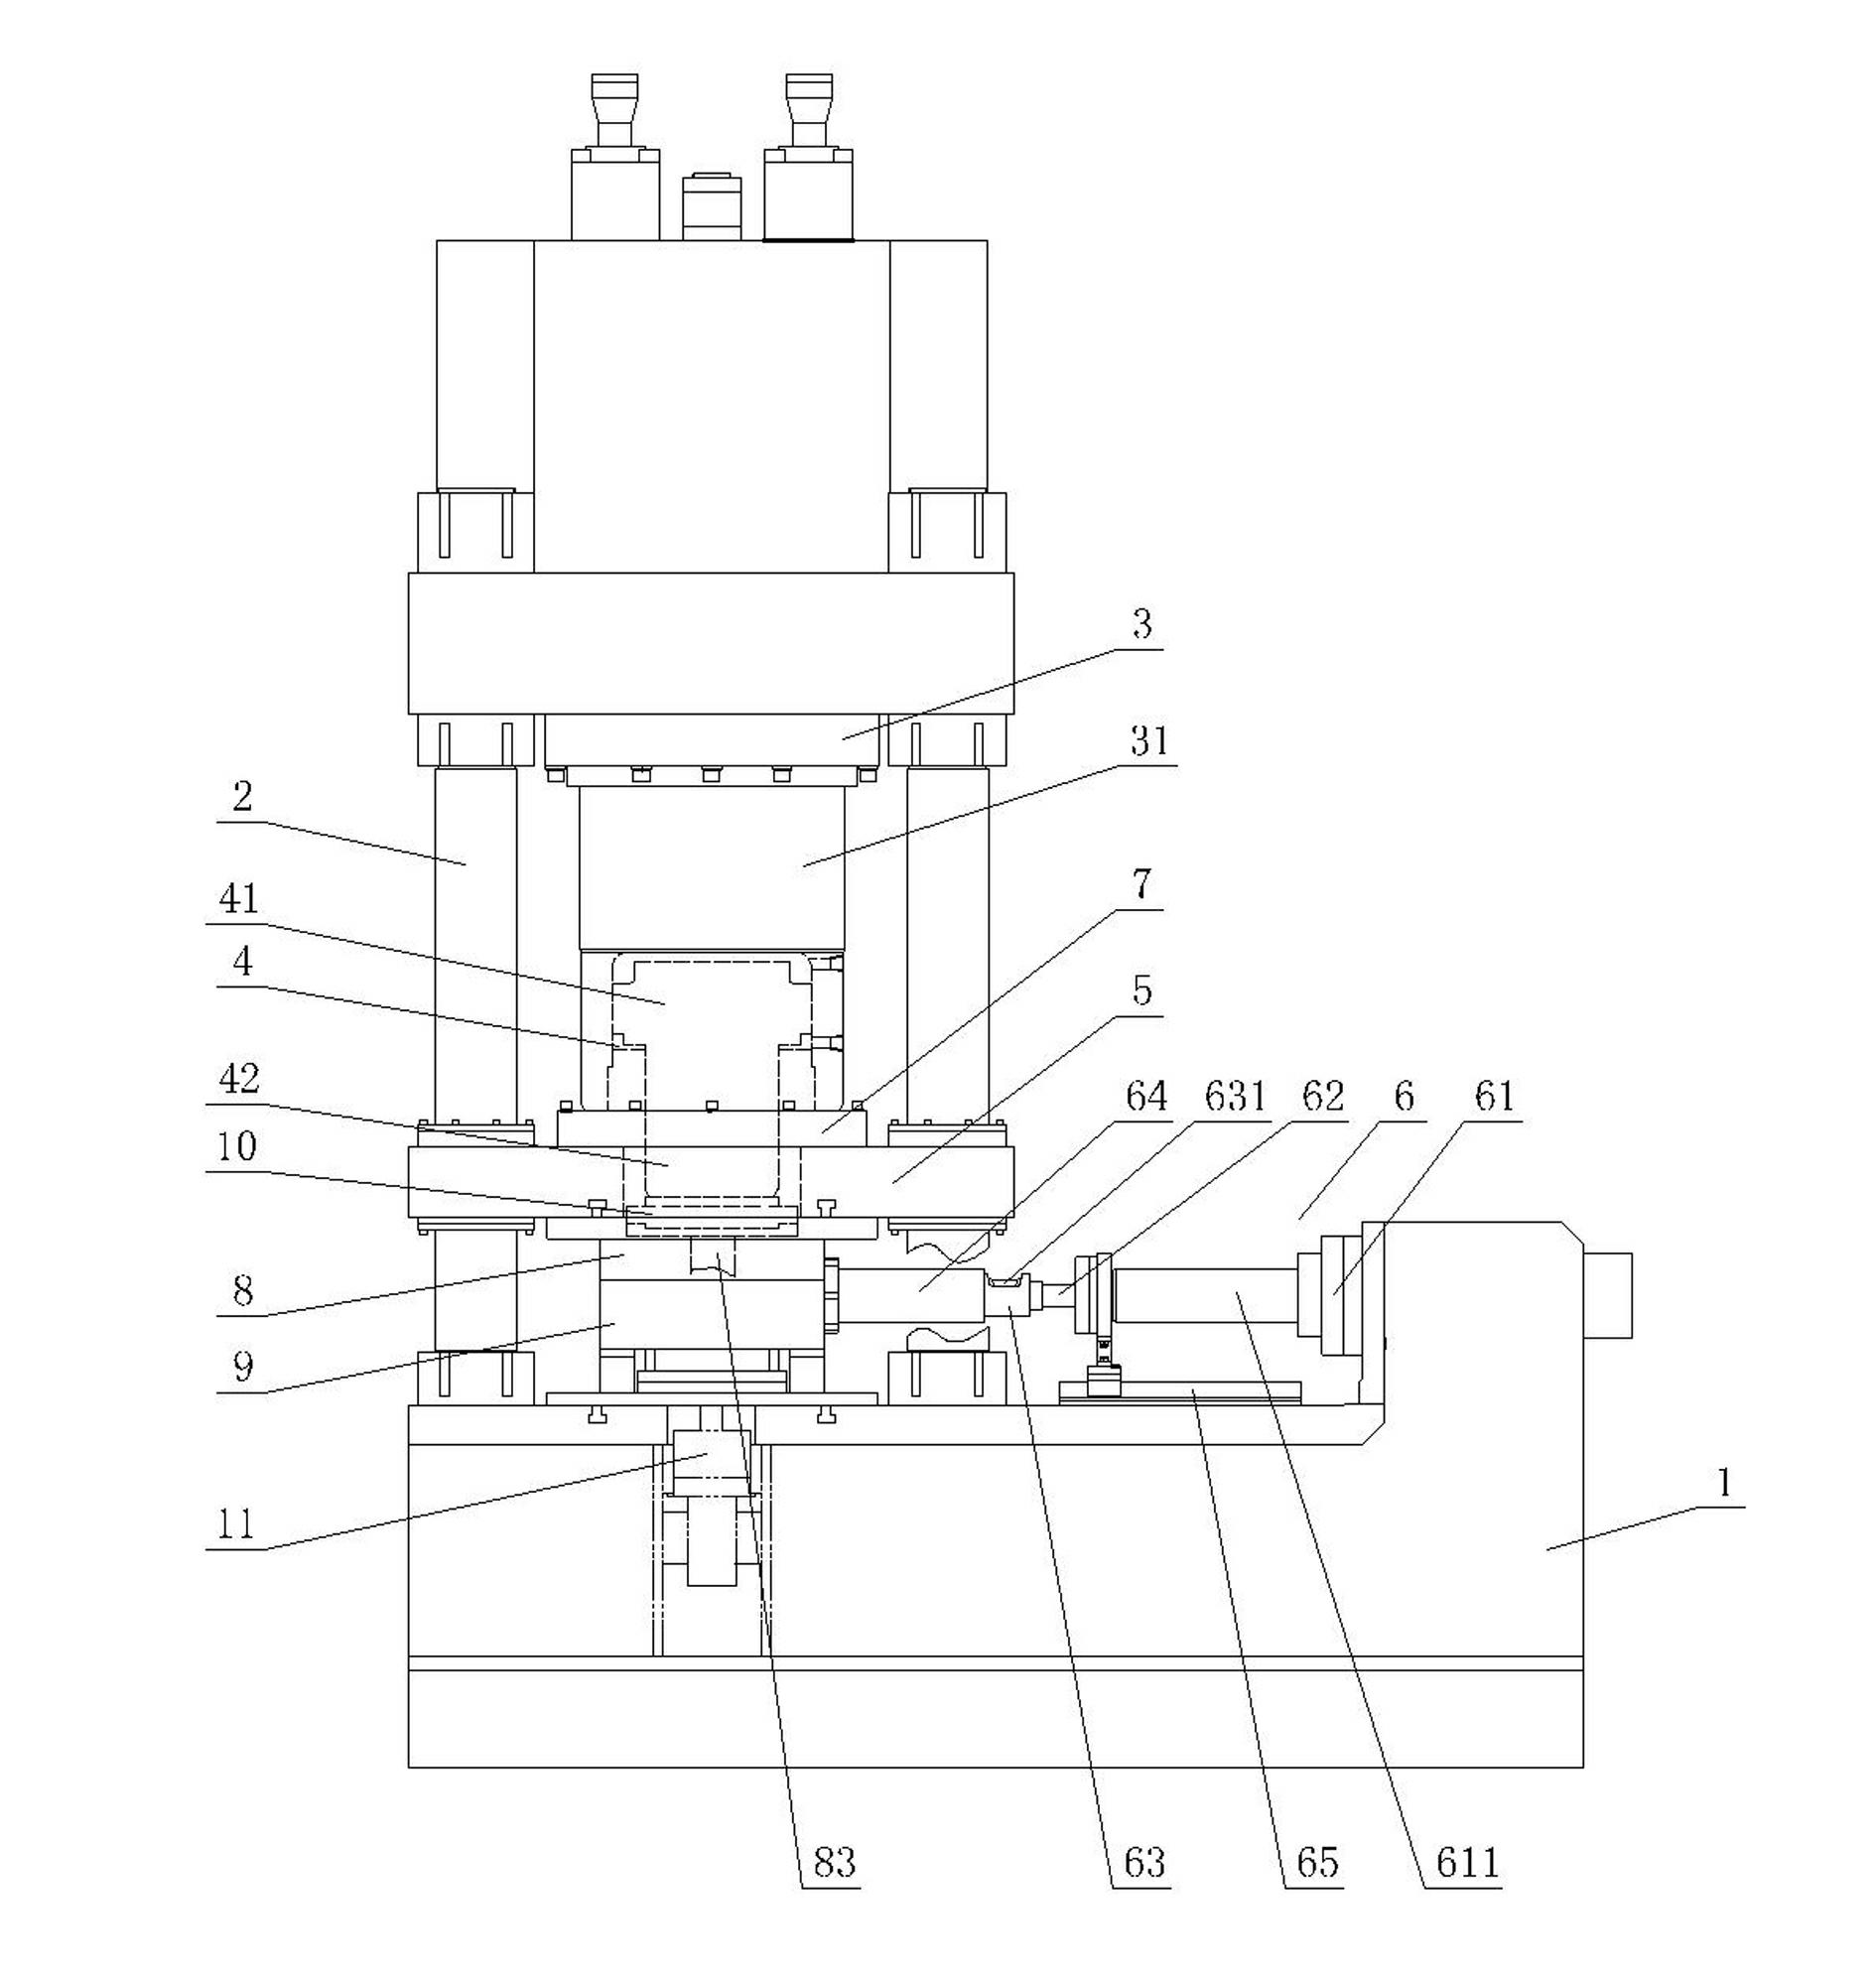 Casting-forging hydropress and method for casting and forging product thereof